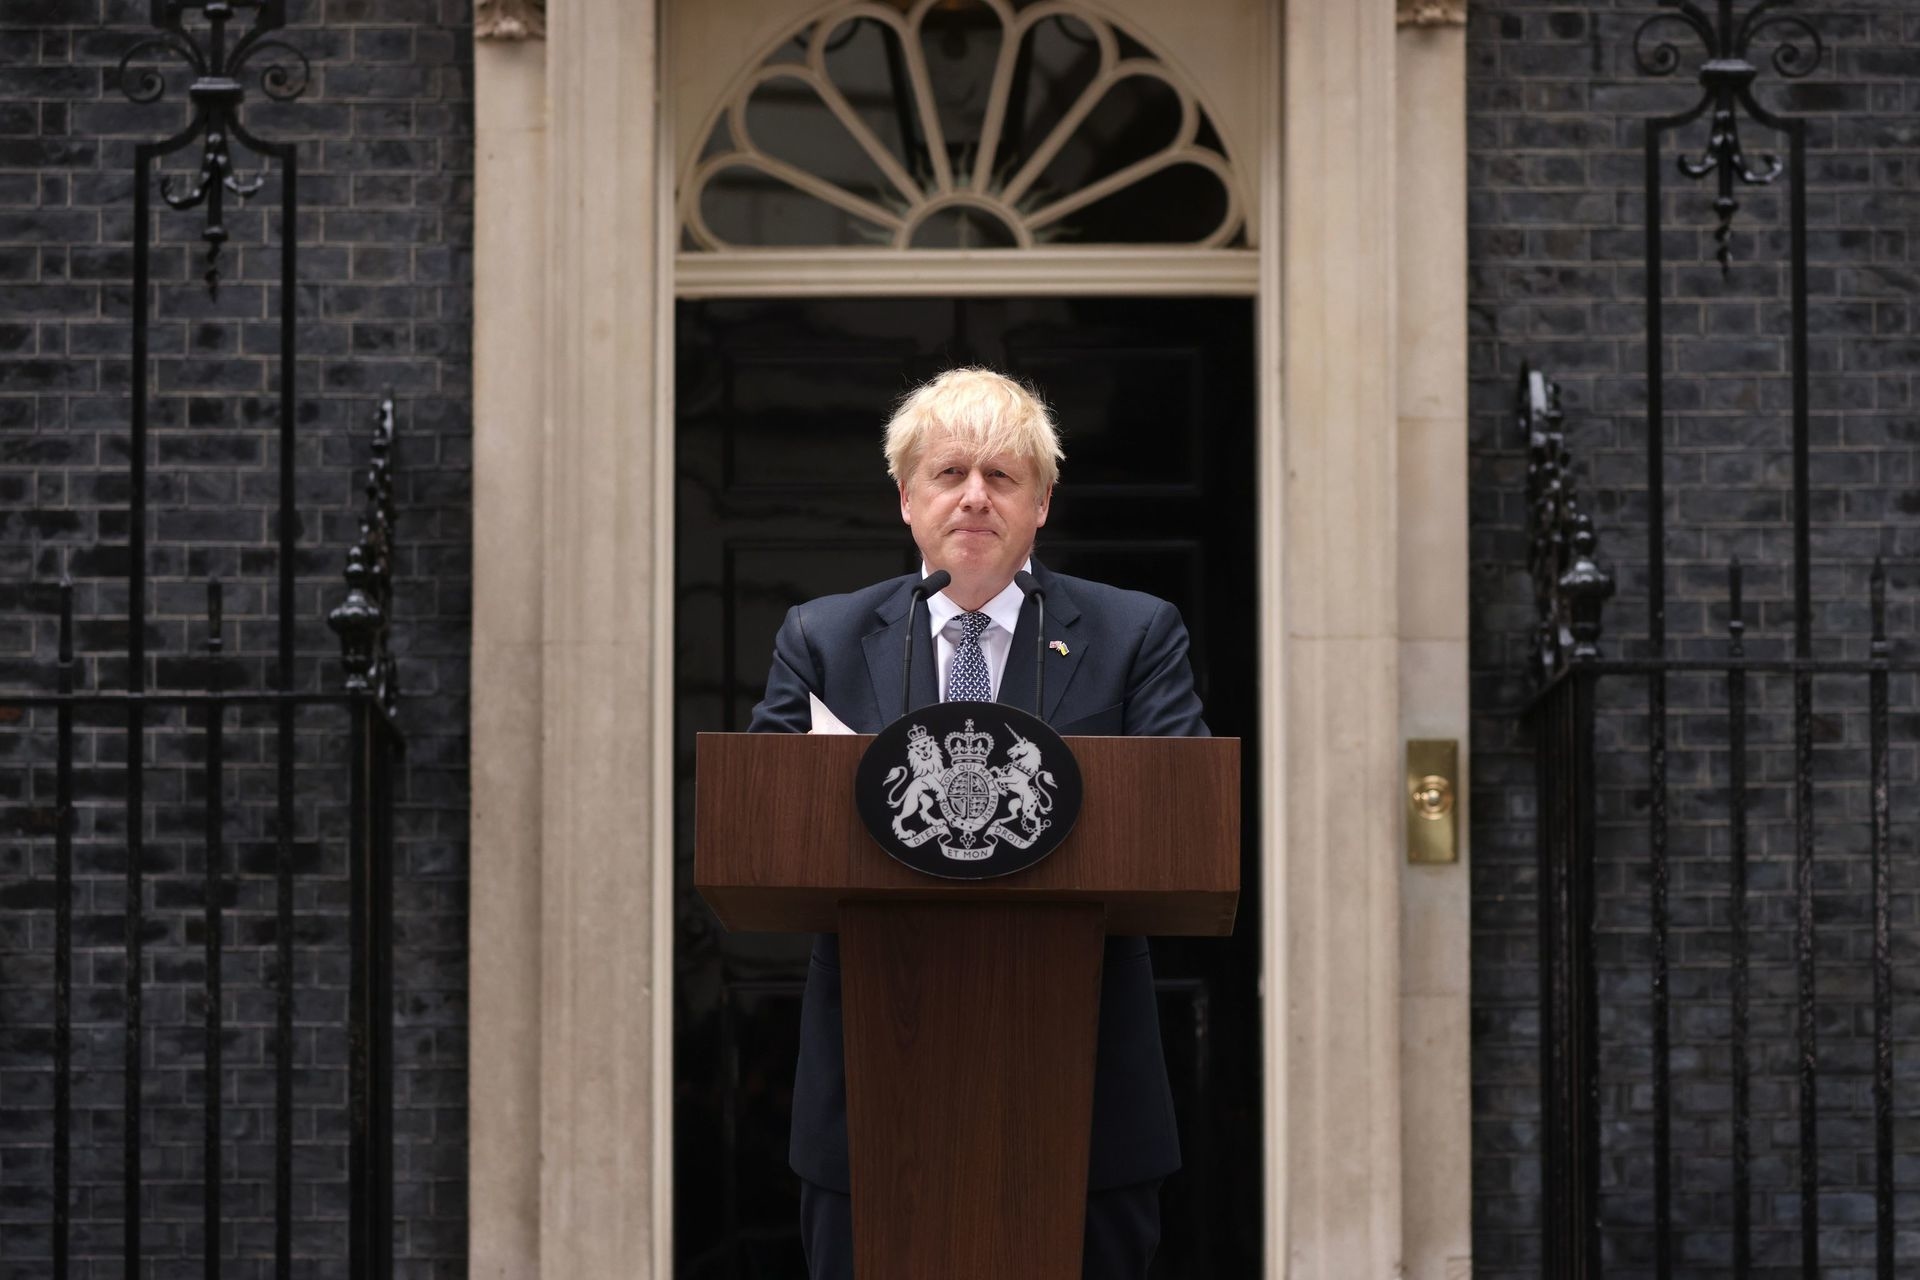 All of which, has led to this moment. The crowds gone, the celebrations muted. The Prime Minister standing in front of Downing Street announcing his plans to resign. In a cutting speech, in which he cited the 